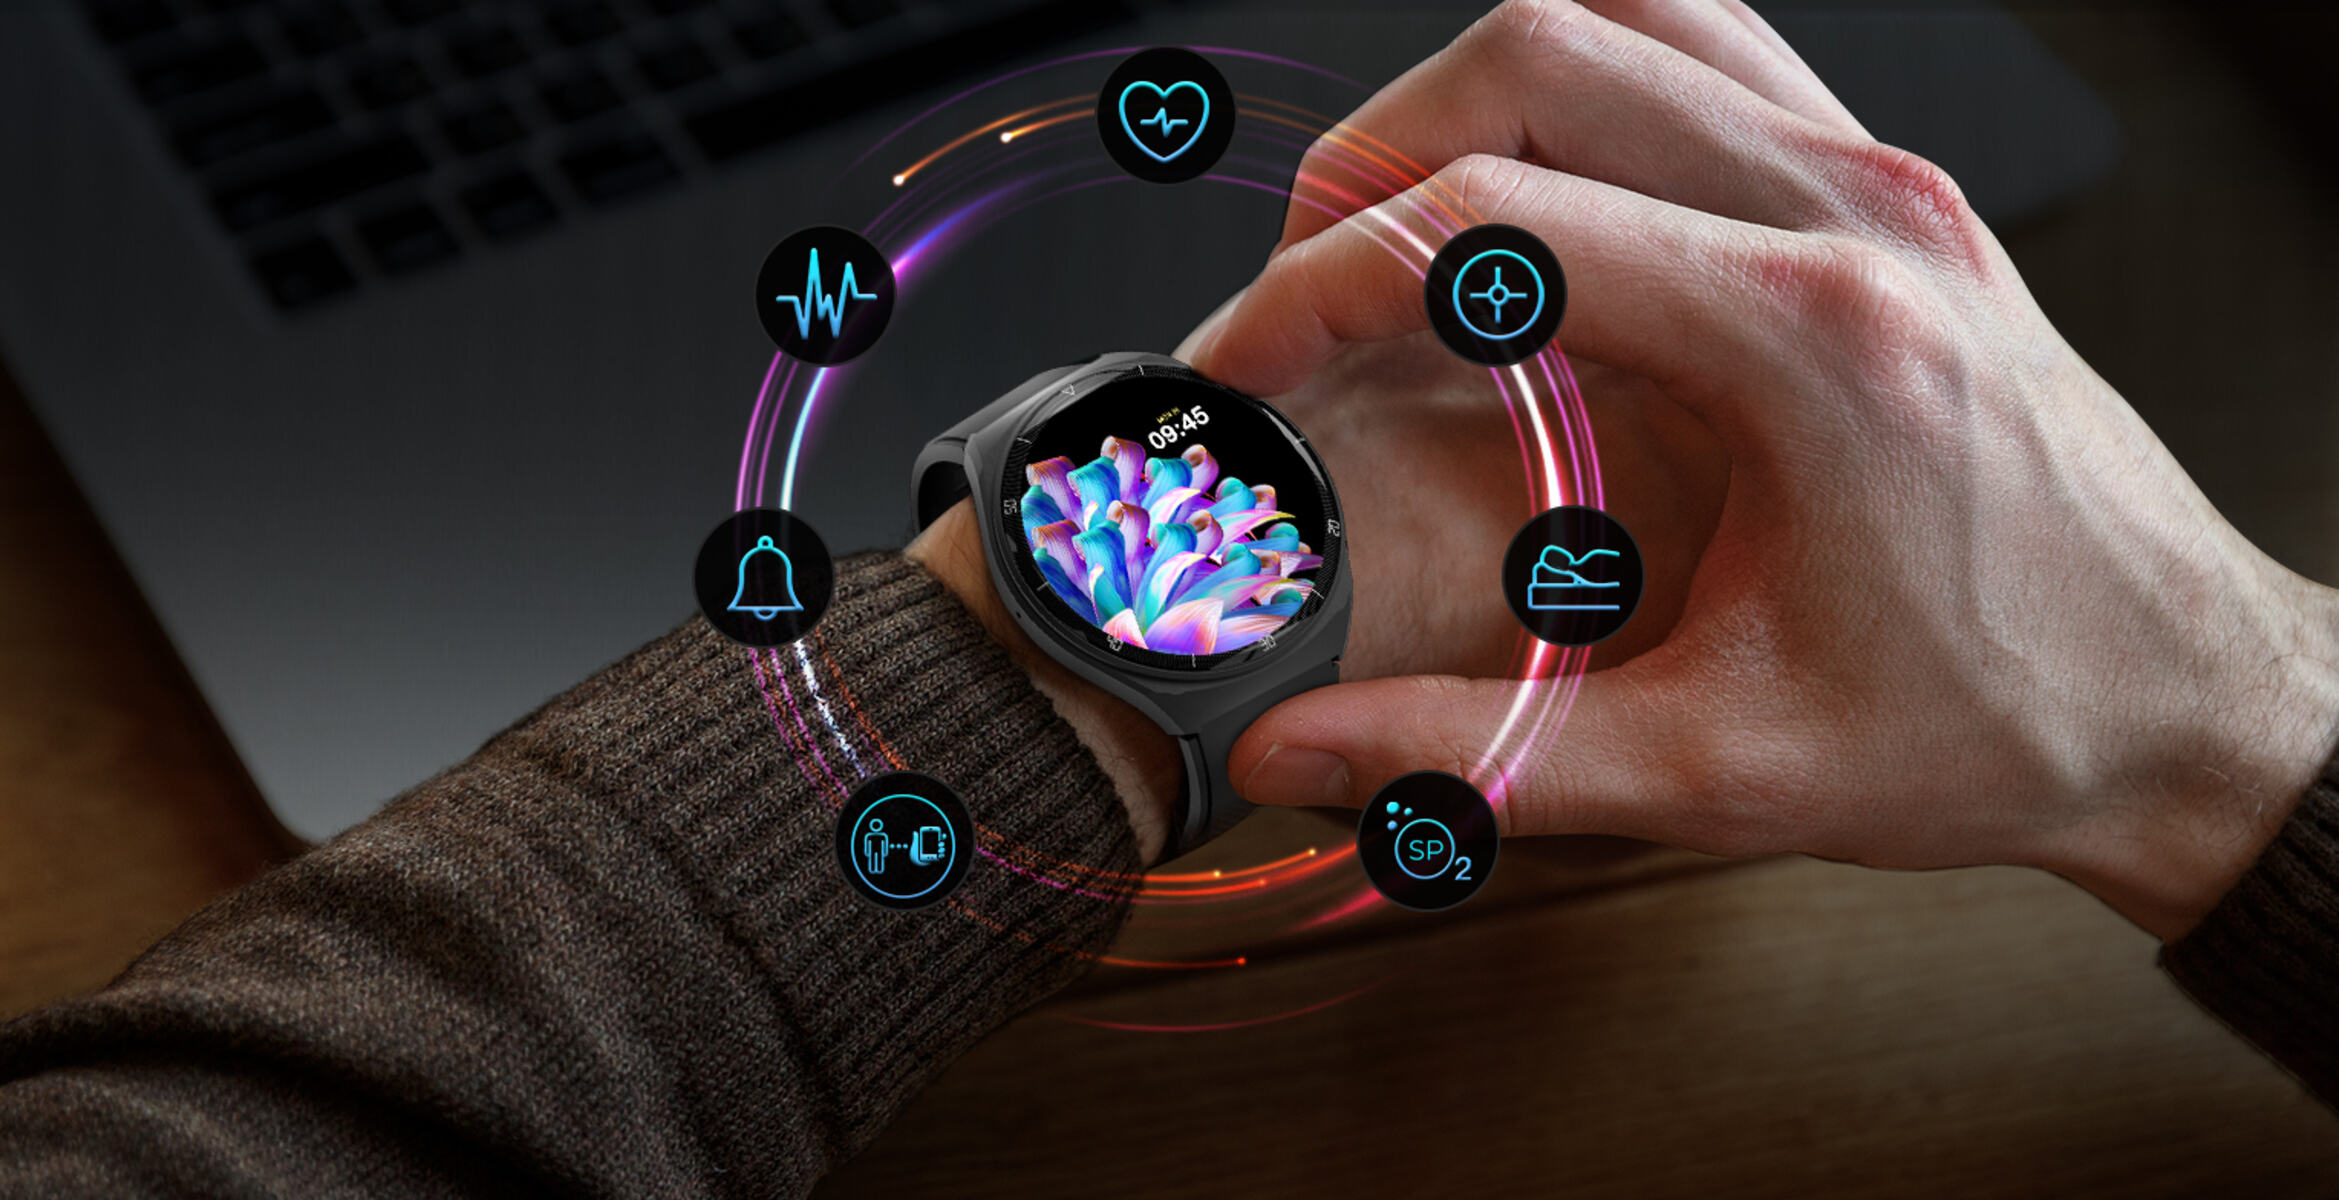 inside-the-technology-how-smartwatches-function